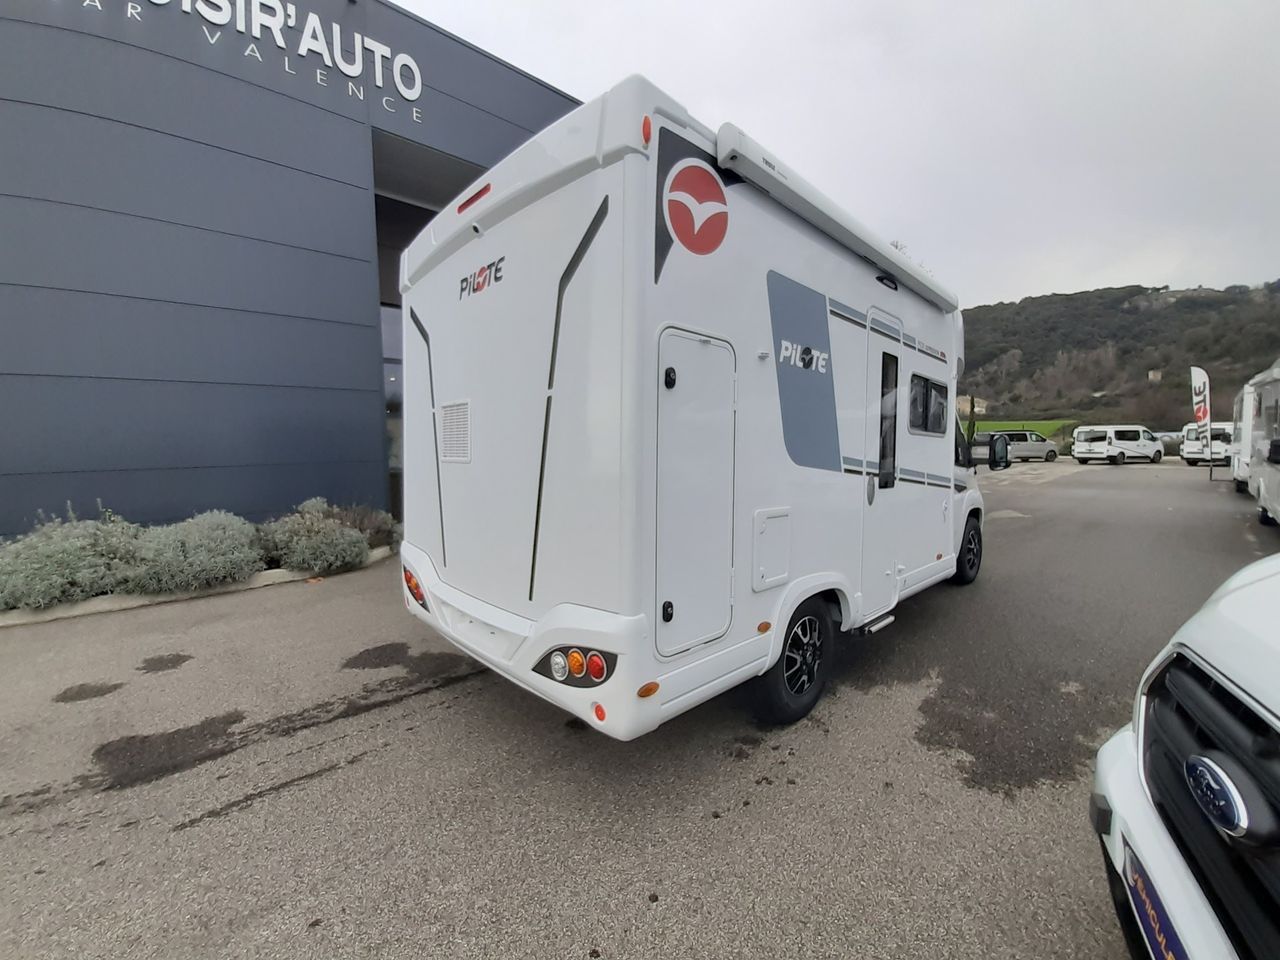 Camping-car - Pilote - P626D EVIDENCE 1 000€ ACCESSOIRES OFFERTS - 2023